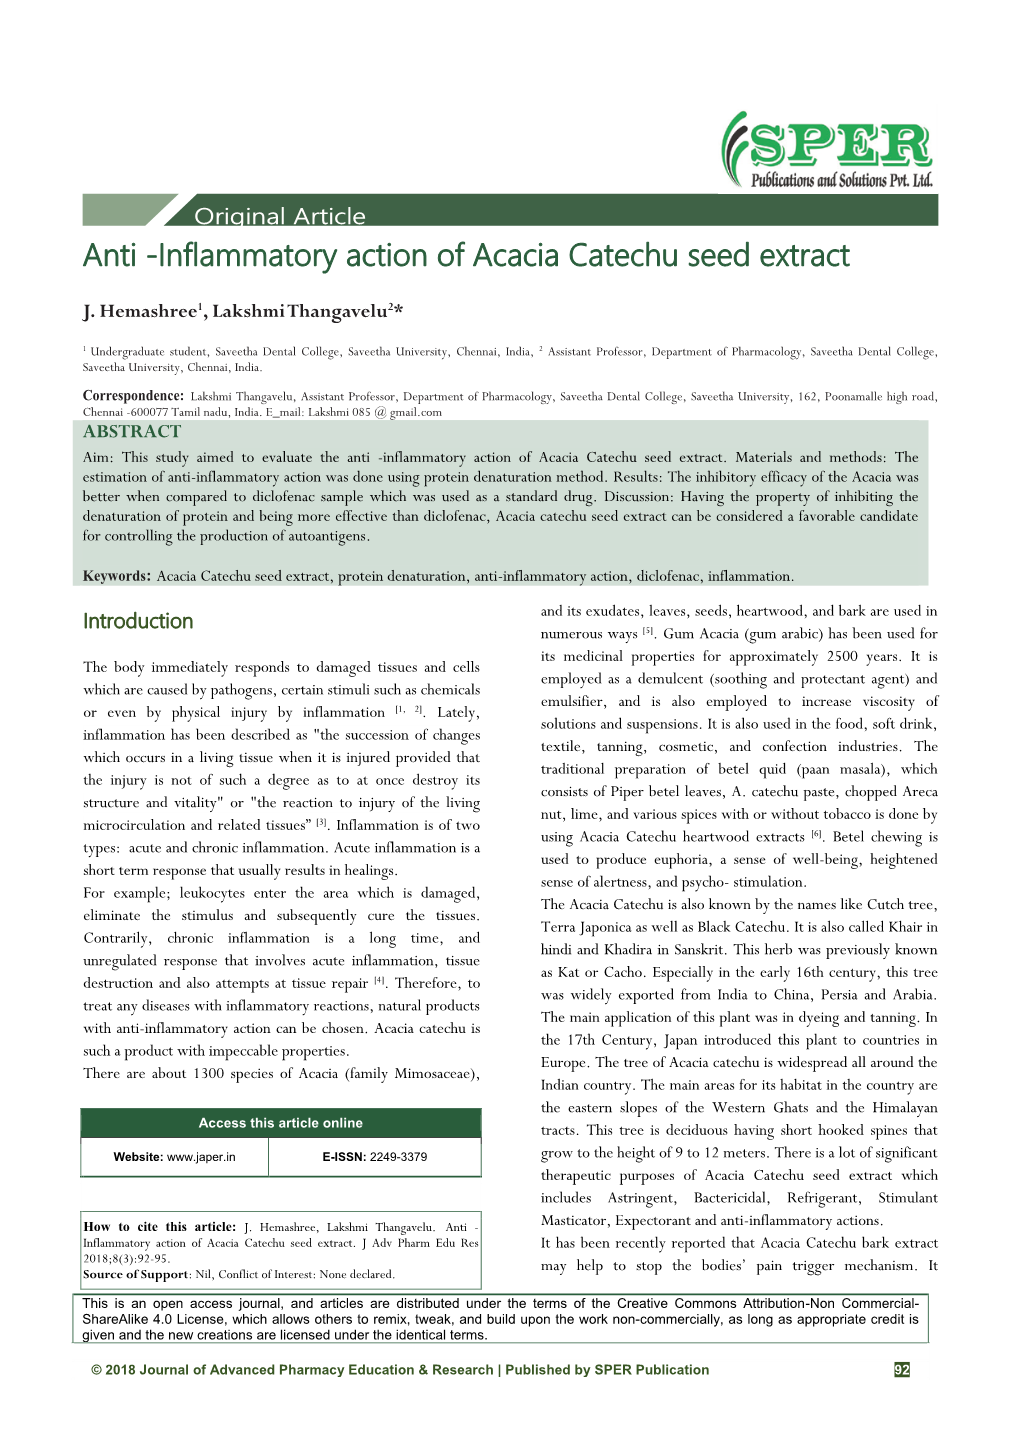 Anti -Inflammatory Action of Acacia Catechu Seed Extract